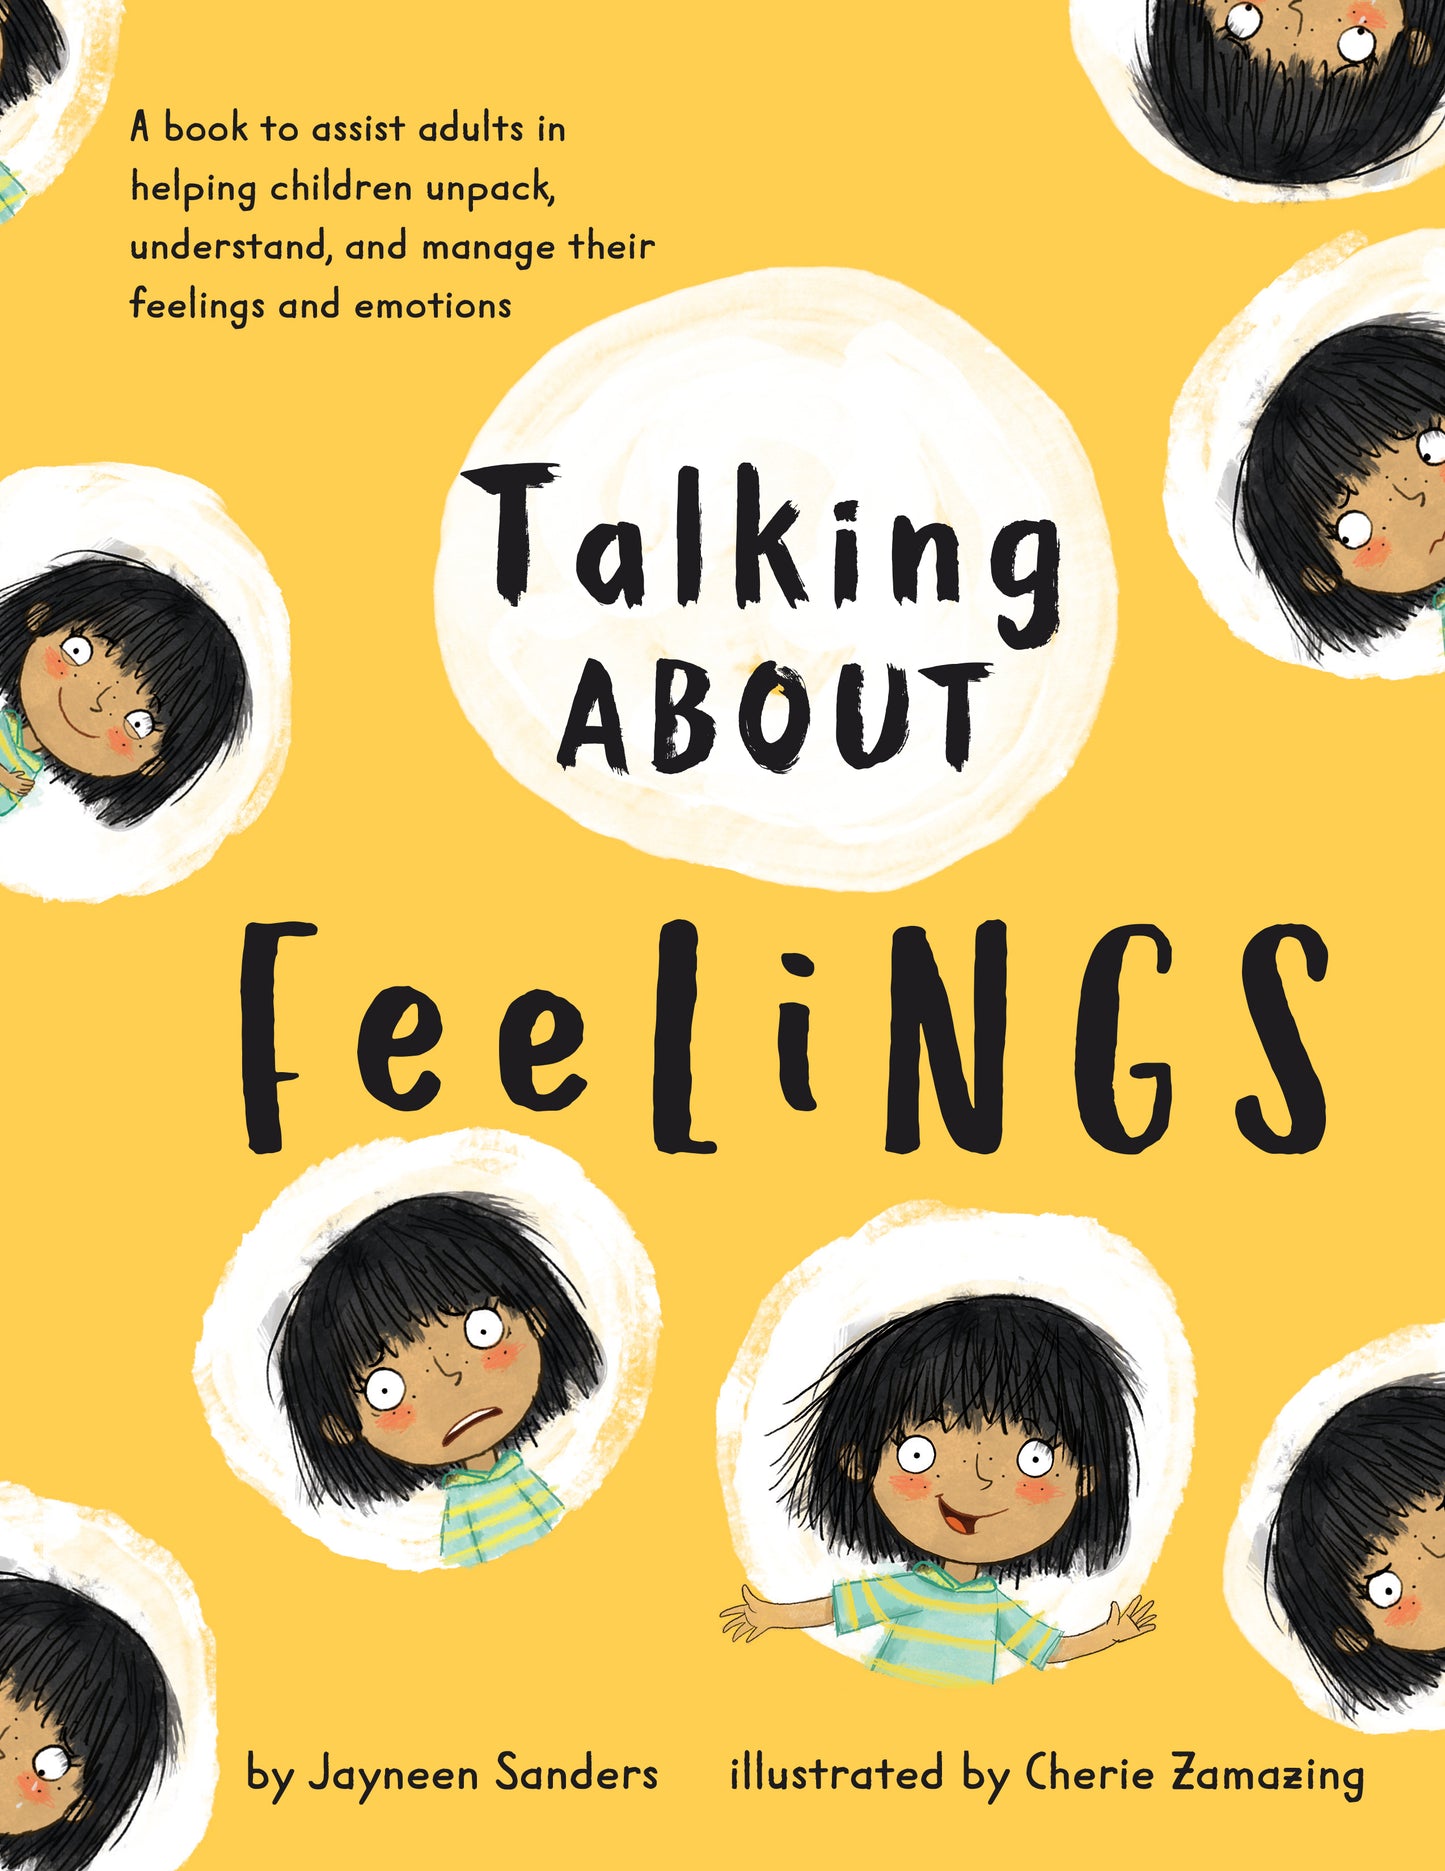 The cover of the book ‘Talking About Feelings’ by Jayneen Sanders.